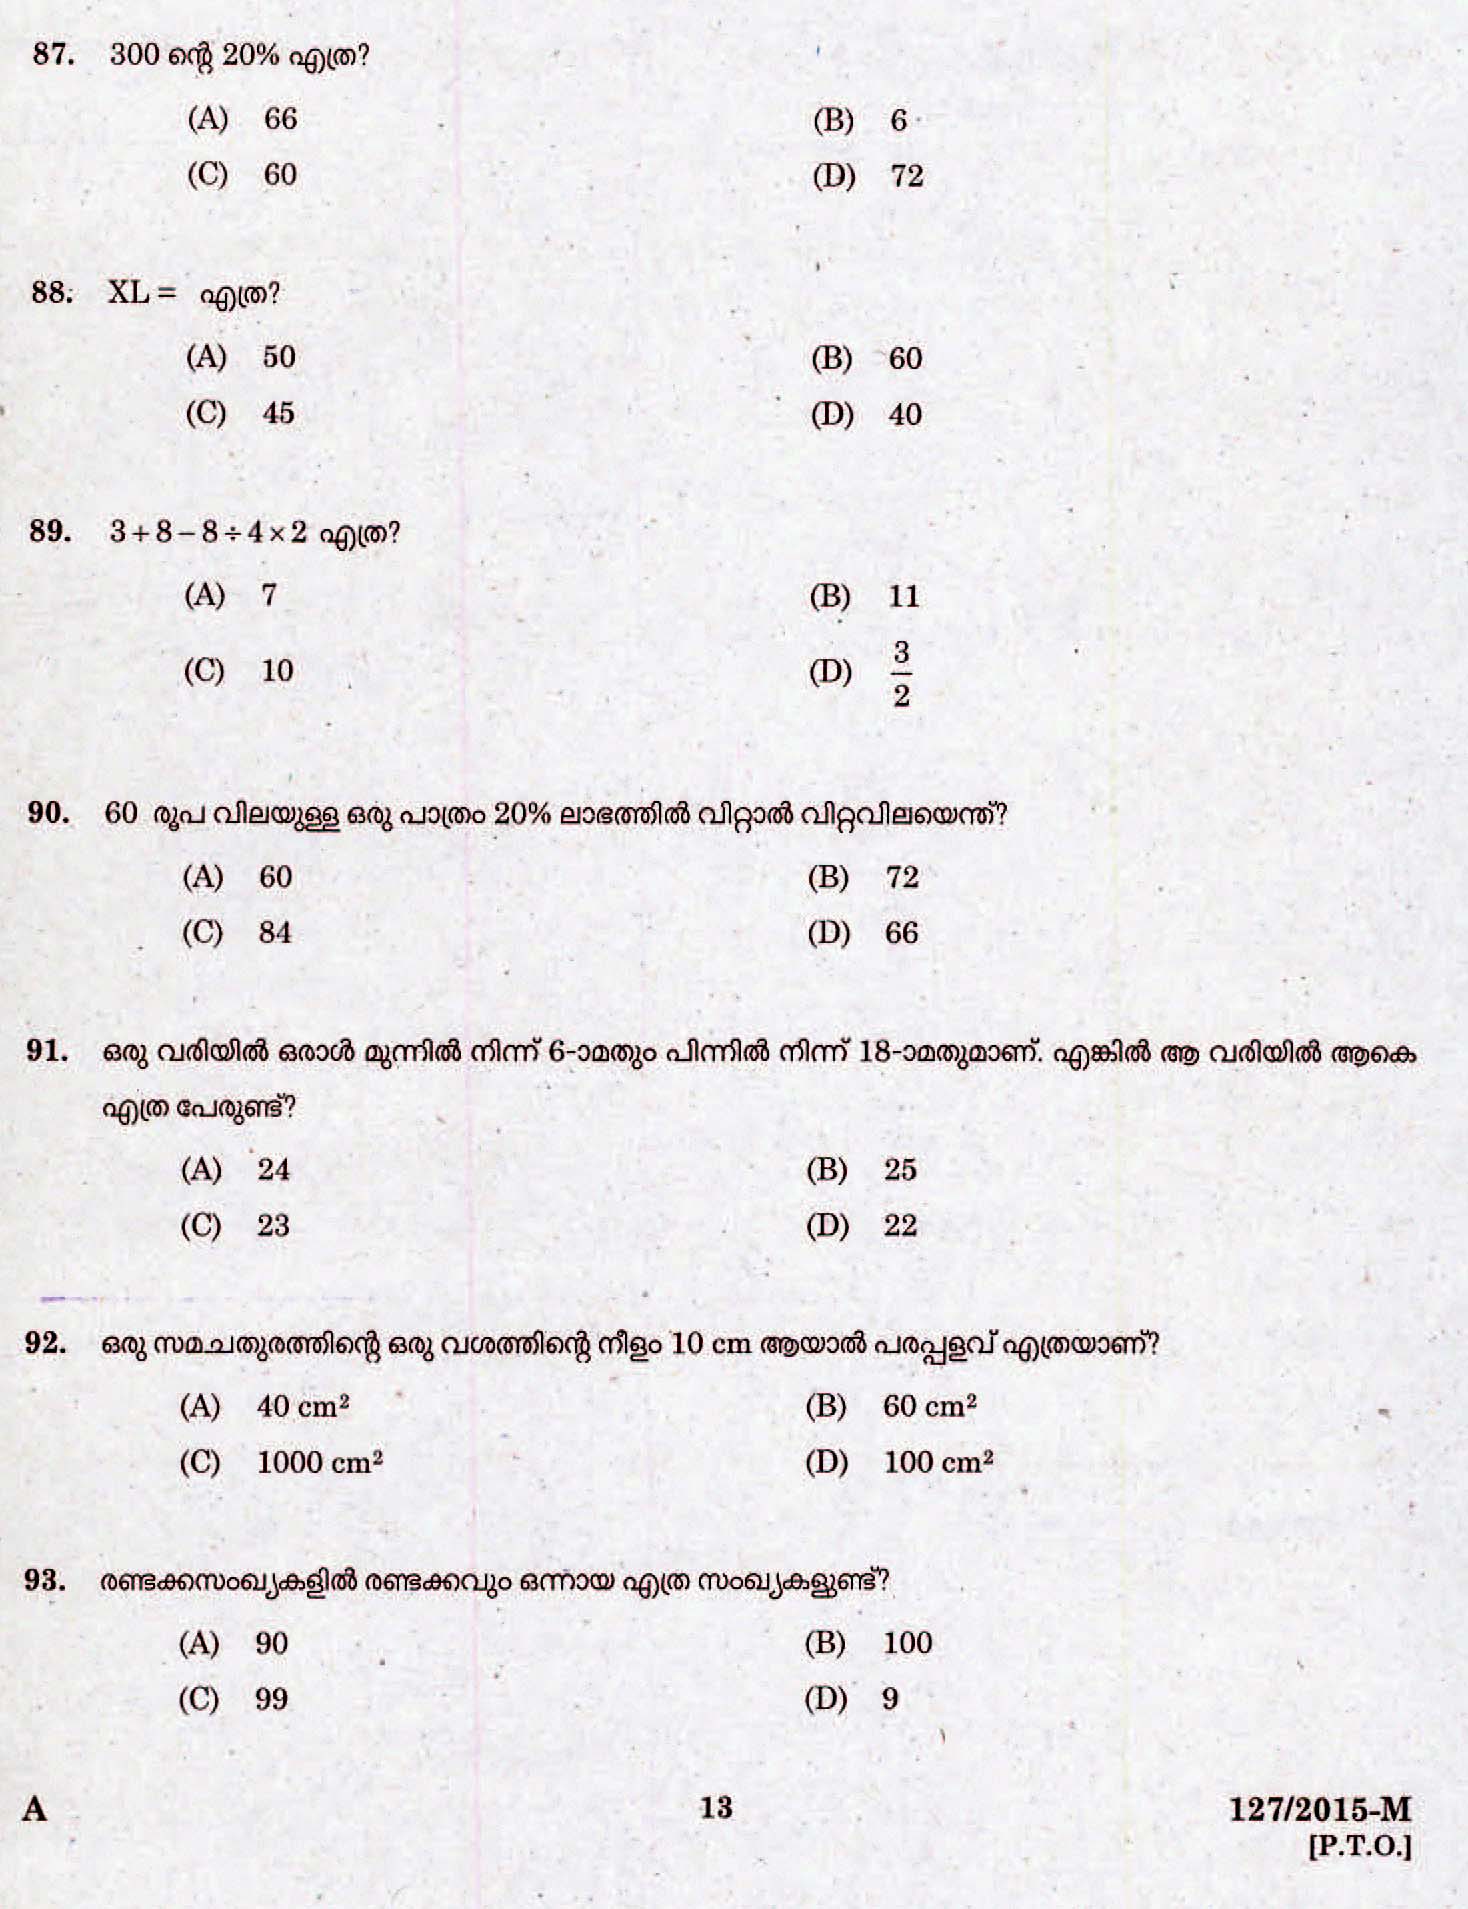 LD Clerk Bill Collector Various Question Paper Malayalam 2015 Paper Code 1272015 M 11